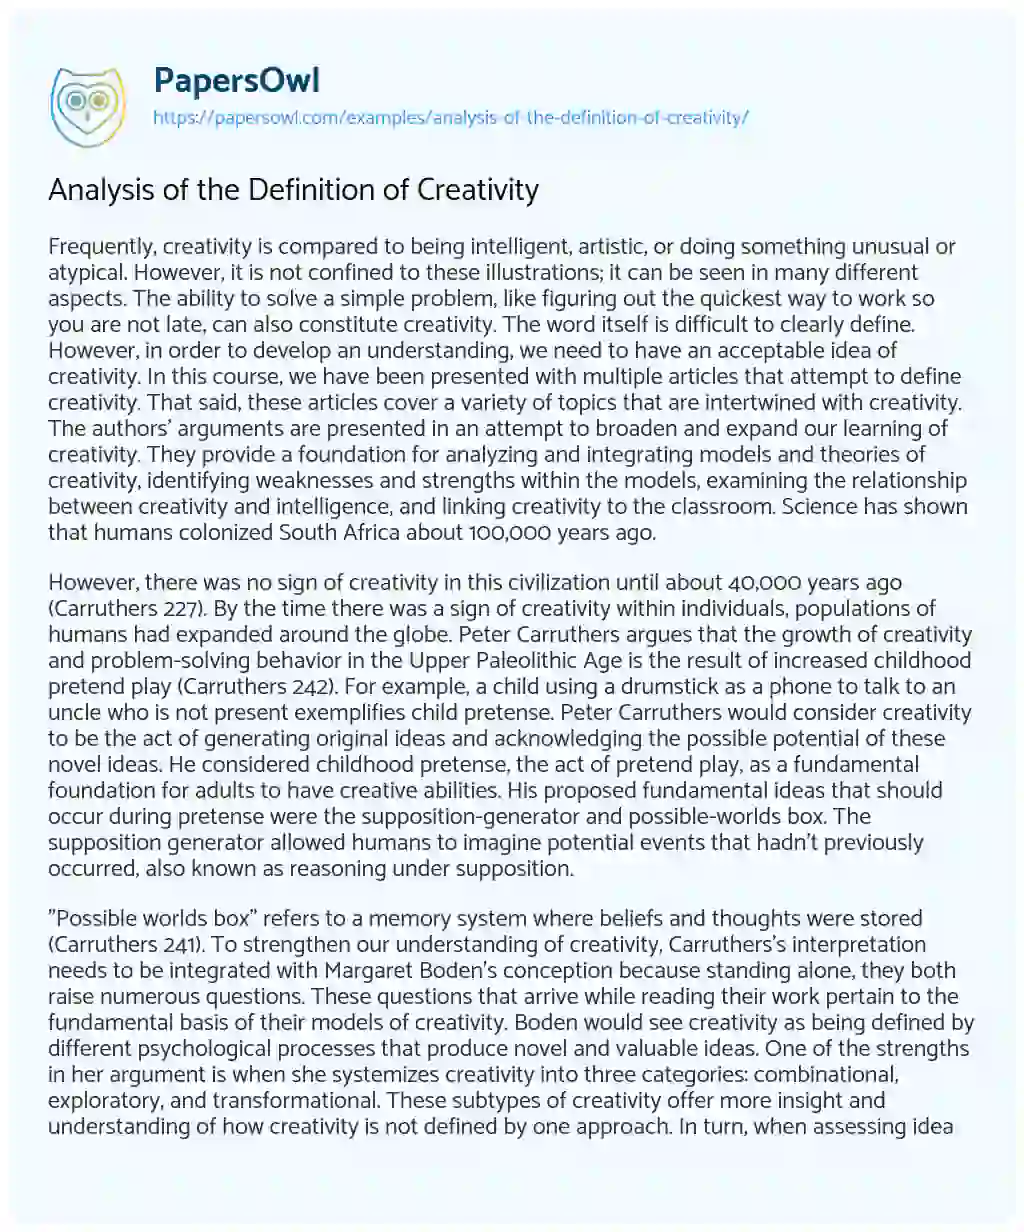 Essay on Analysis of the Definition of Creativity